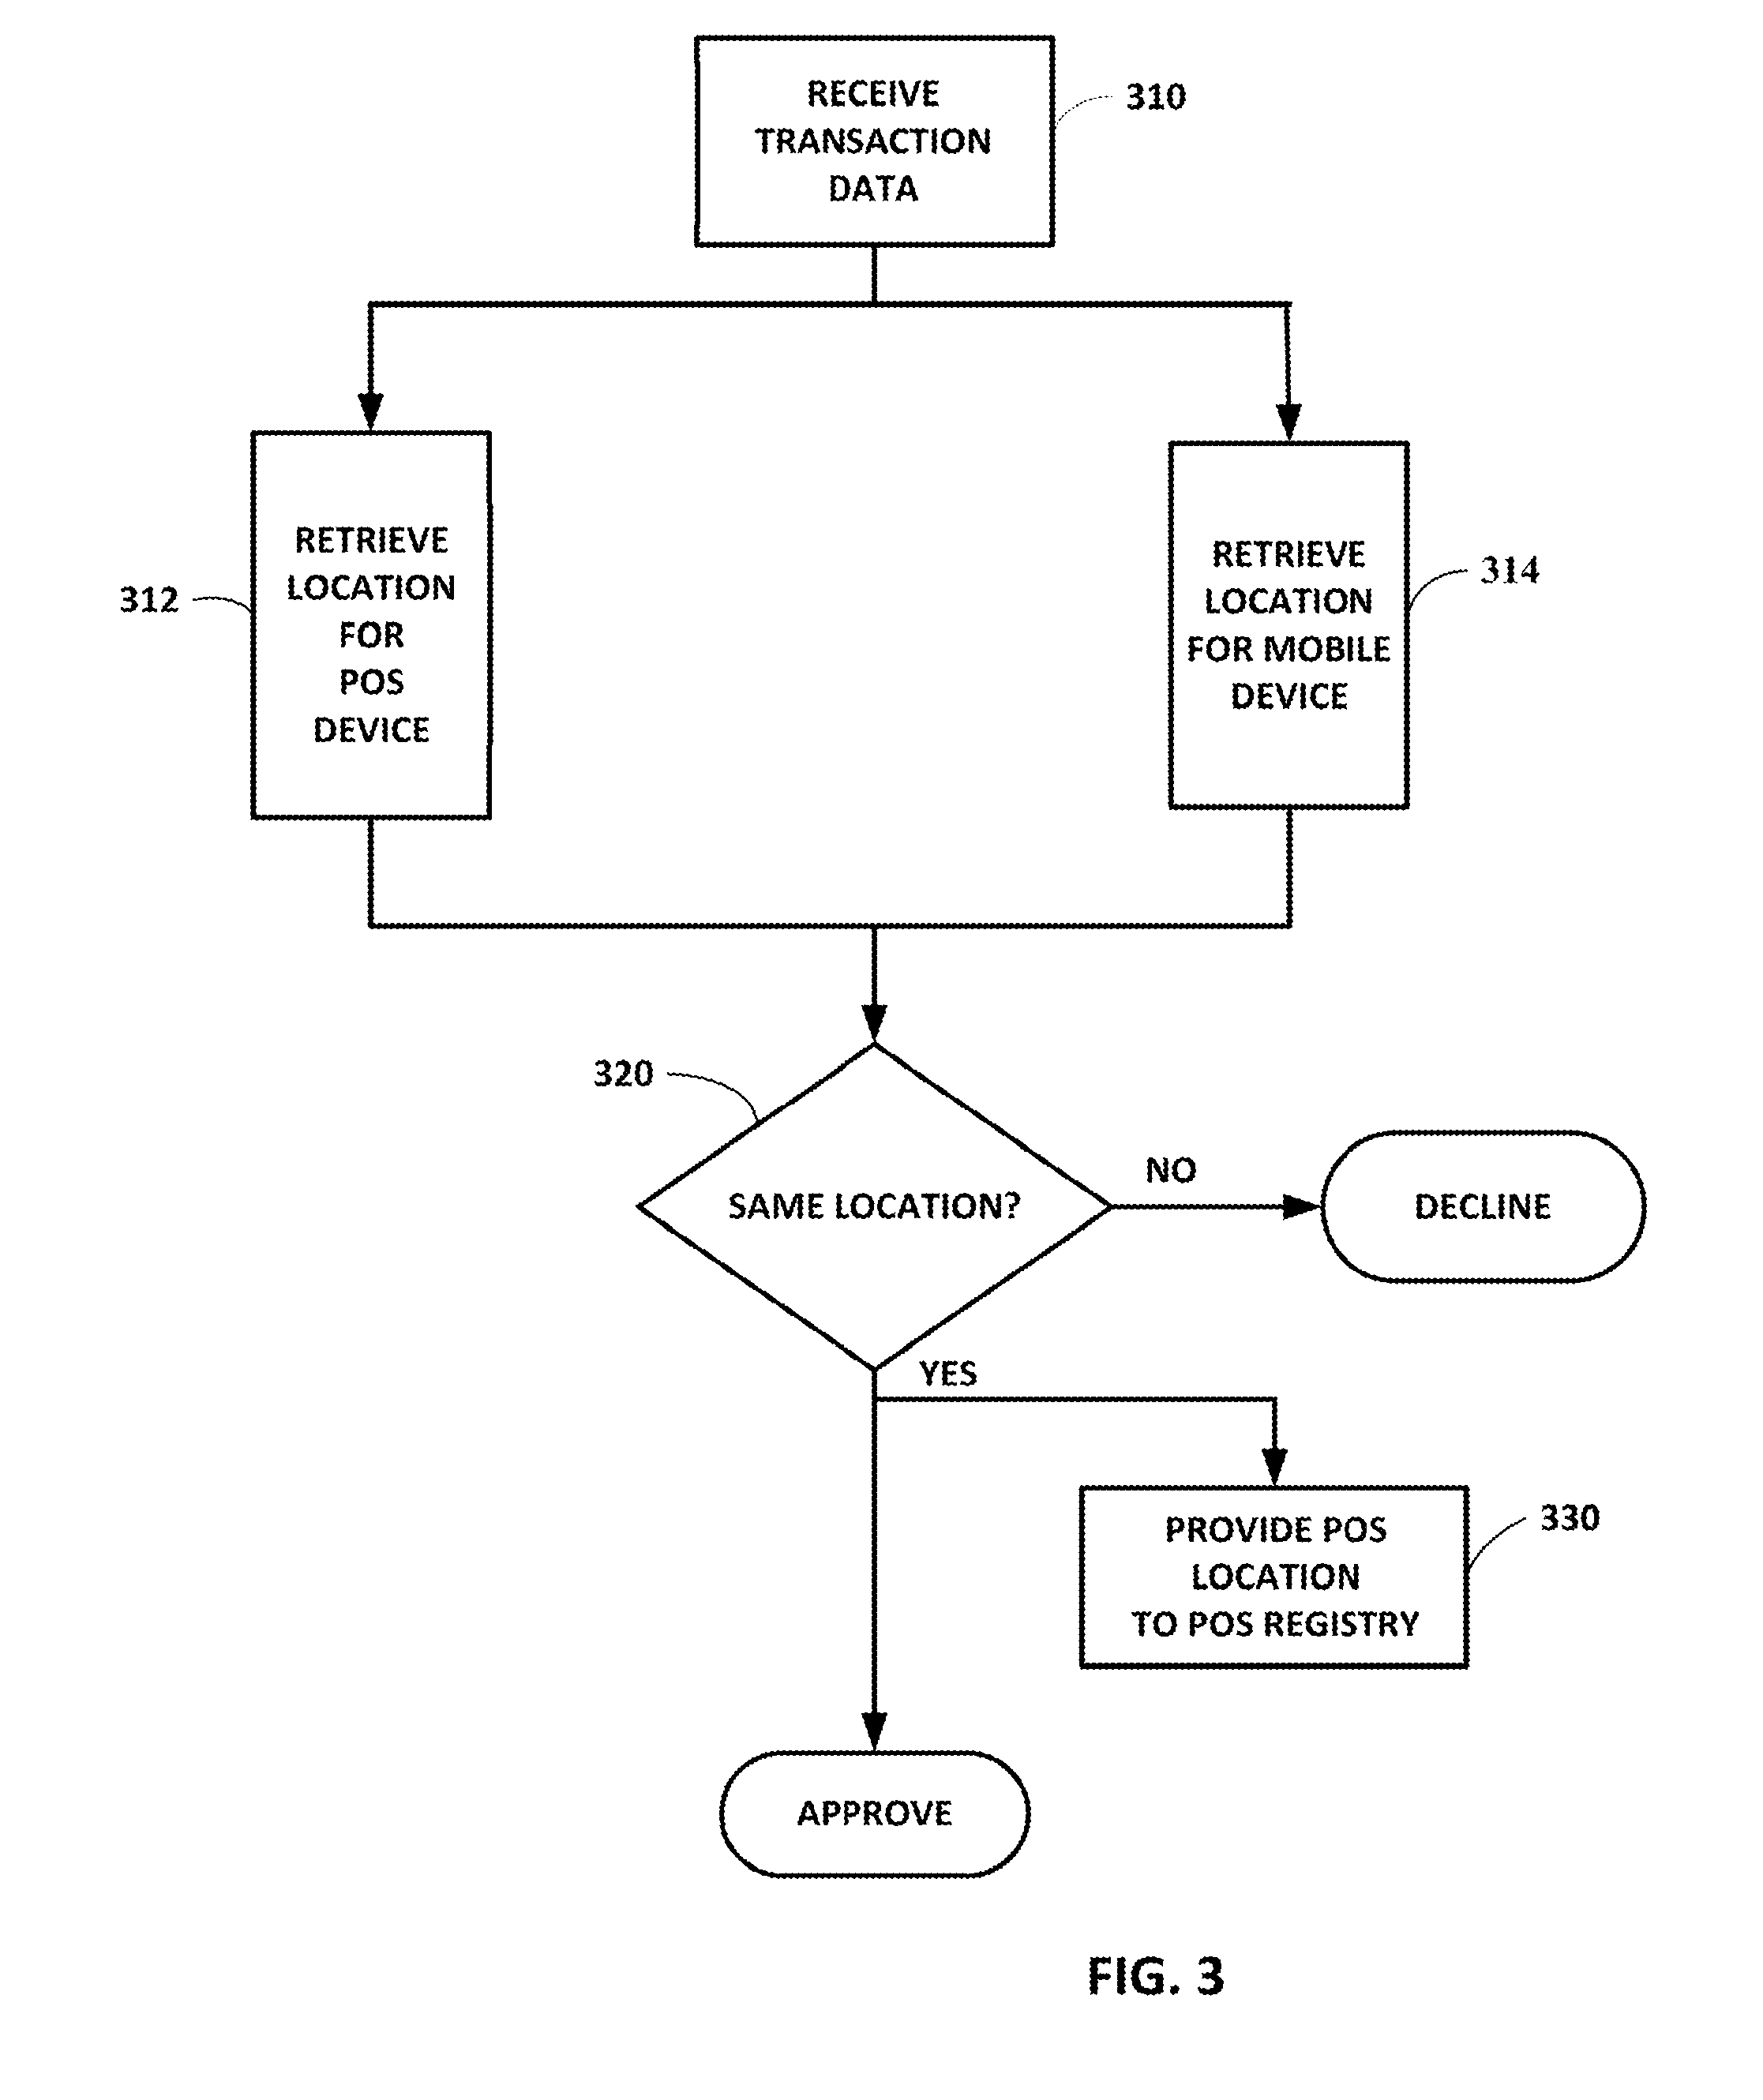 Location-based authentication of transactions conducted using mobile devices